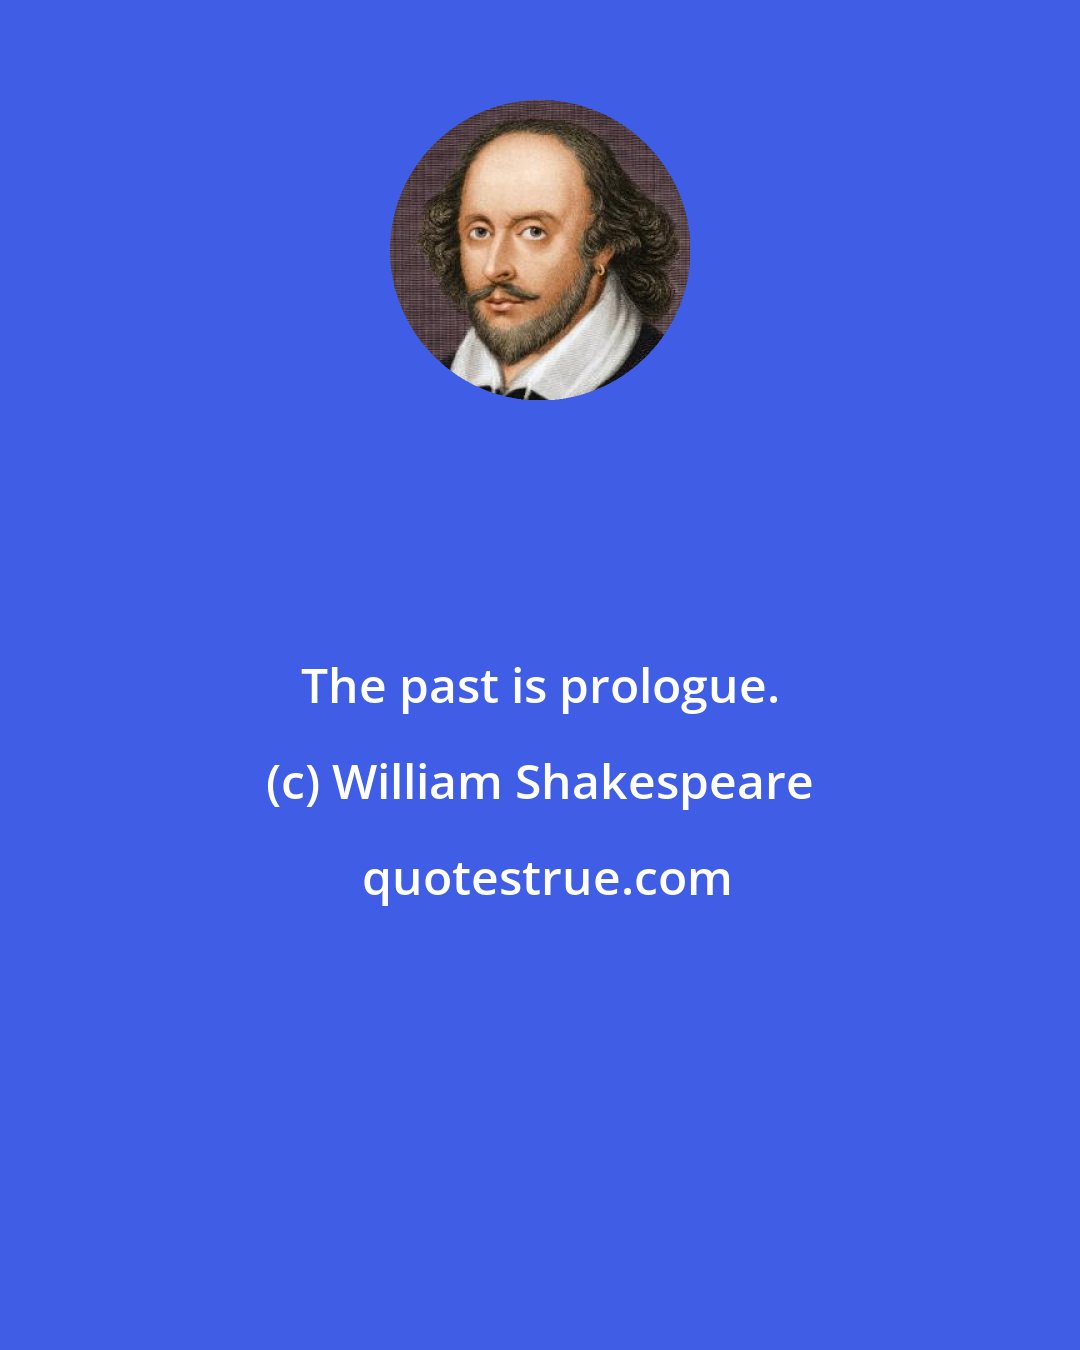 William Shakespeare: The past is prologue.